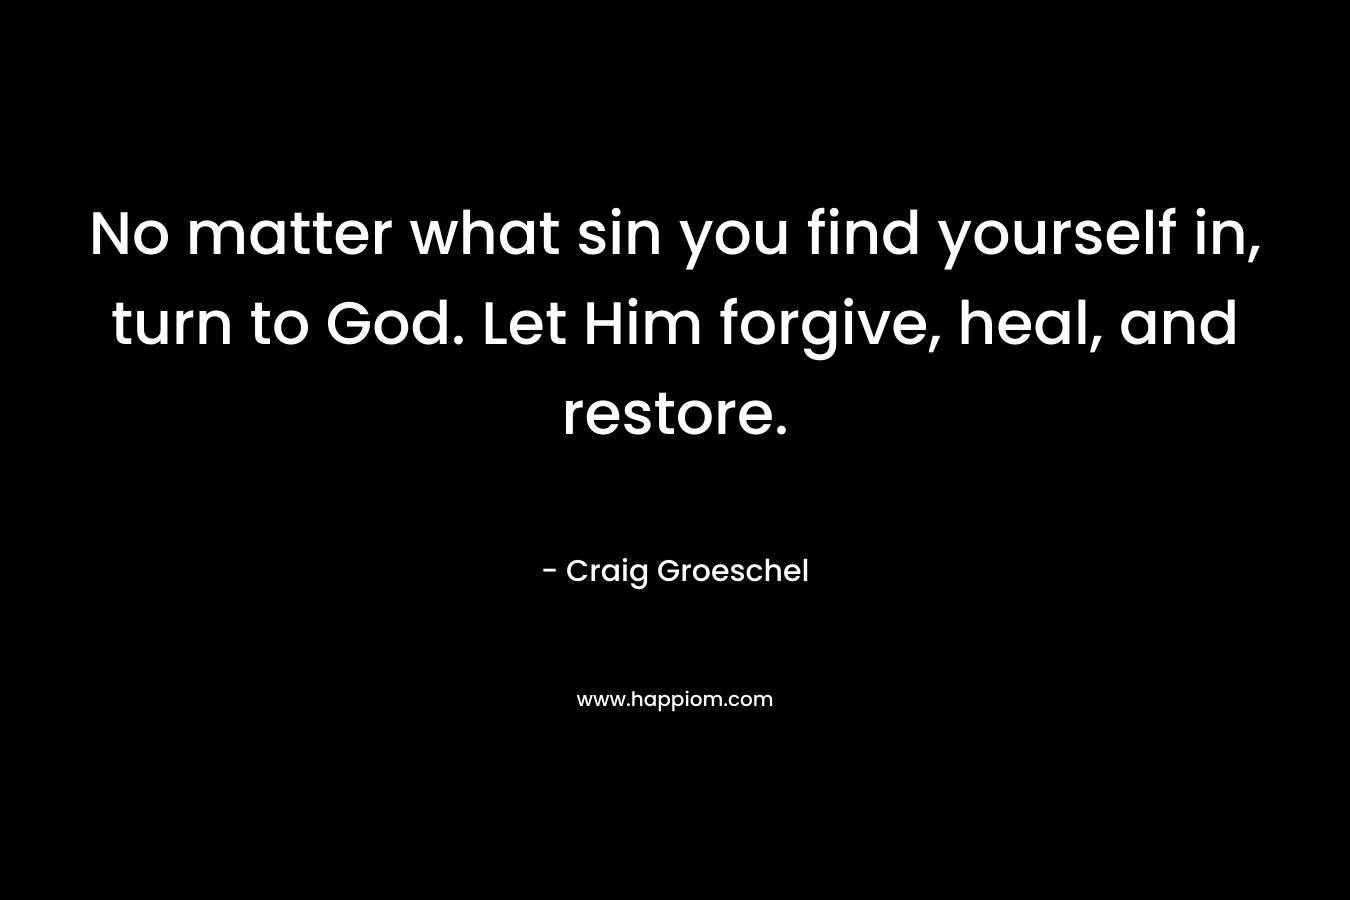 No matter what sin you find yourself in, turn to God. Let Him forgive, heal, and restore.